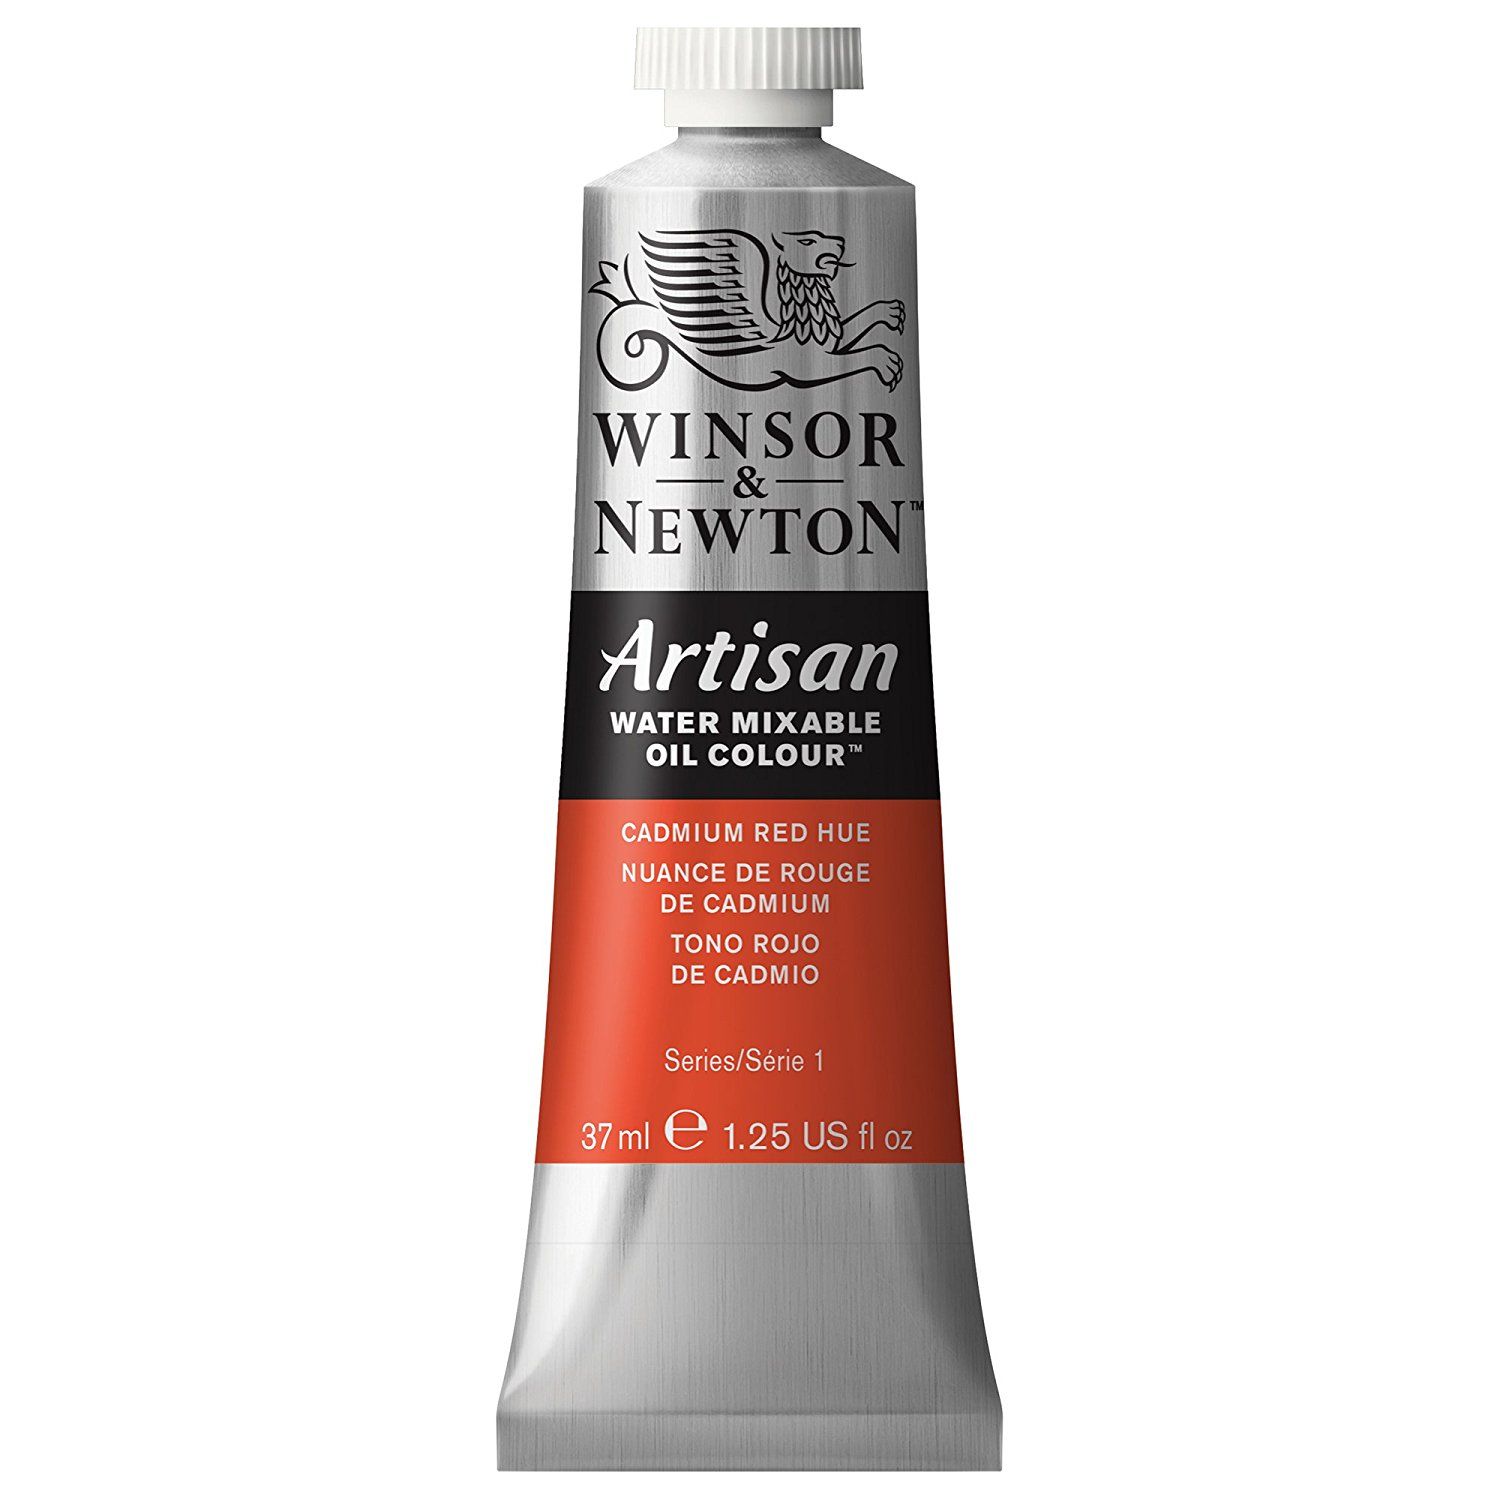 Artisan Water Mixable Oil - Cadmium Red Hue 37ml